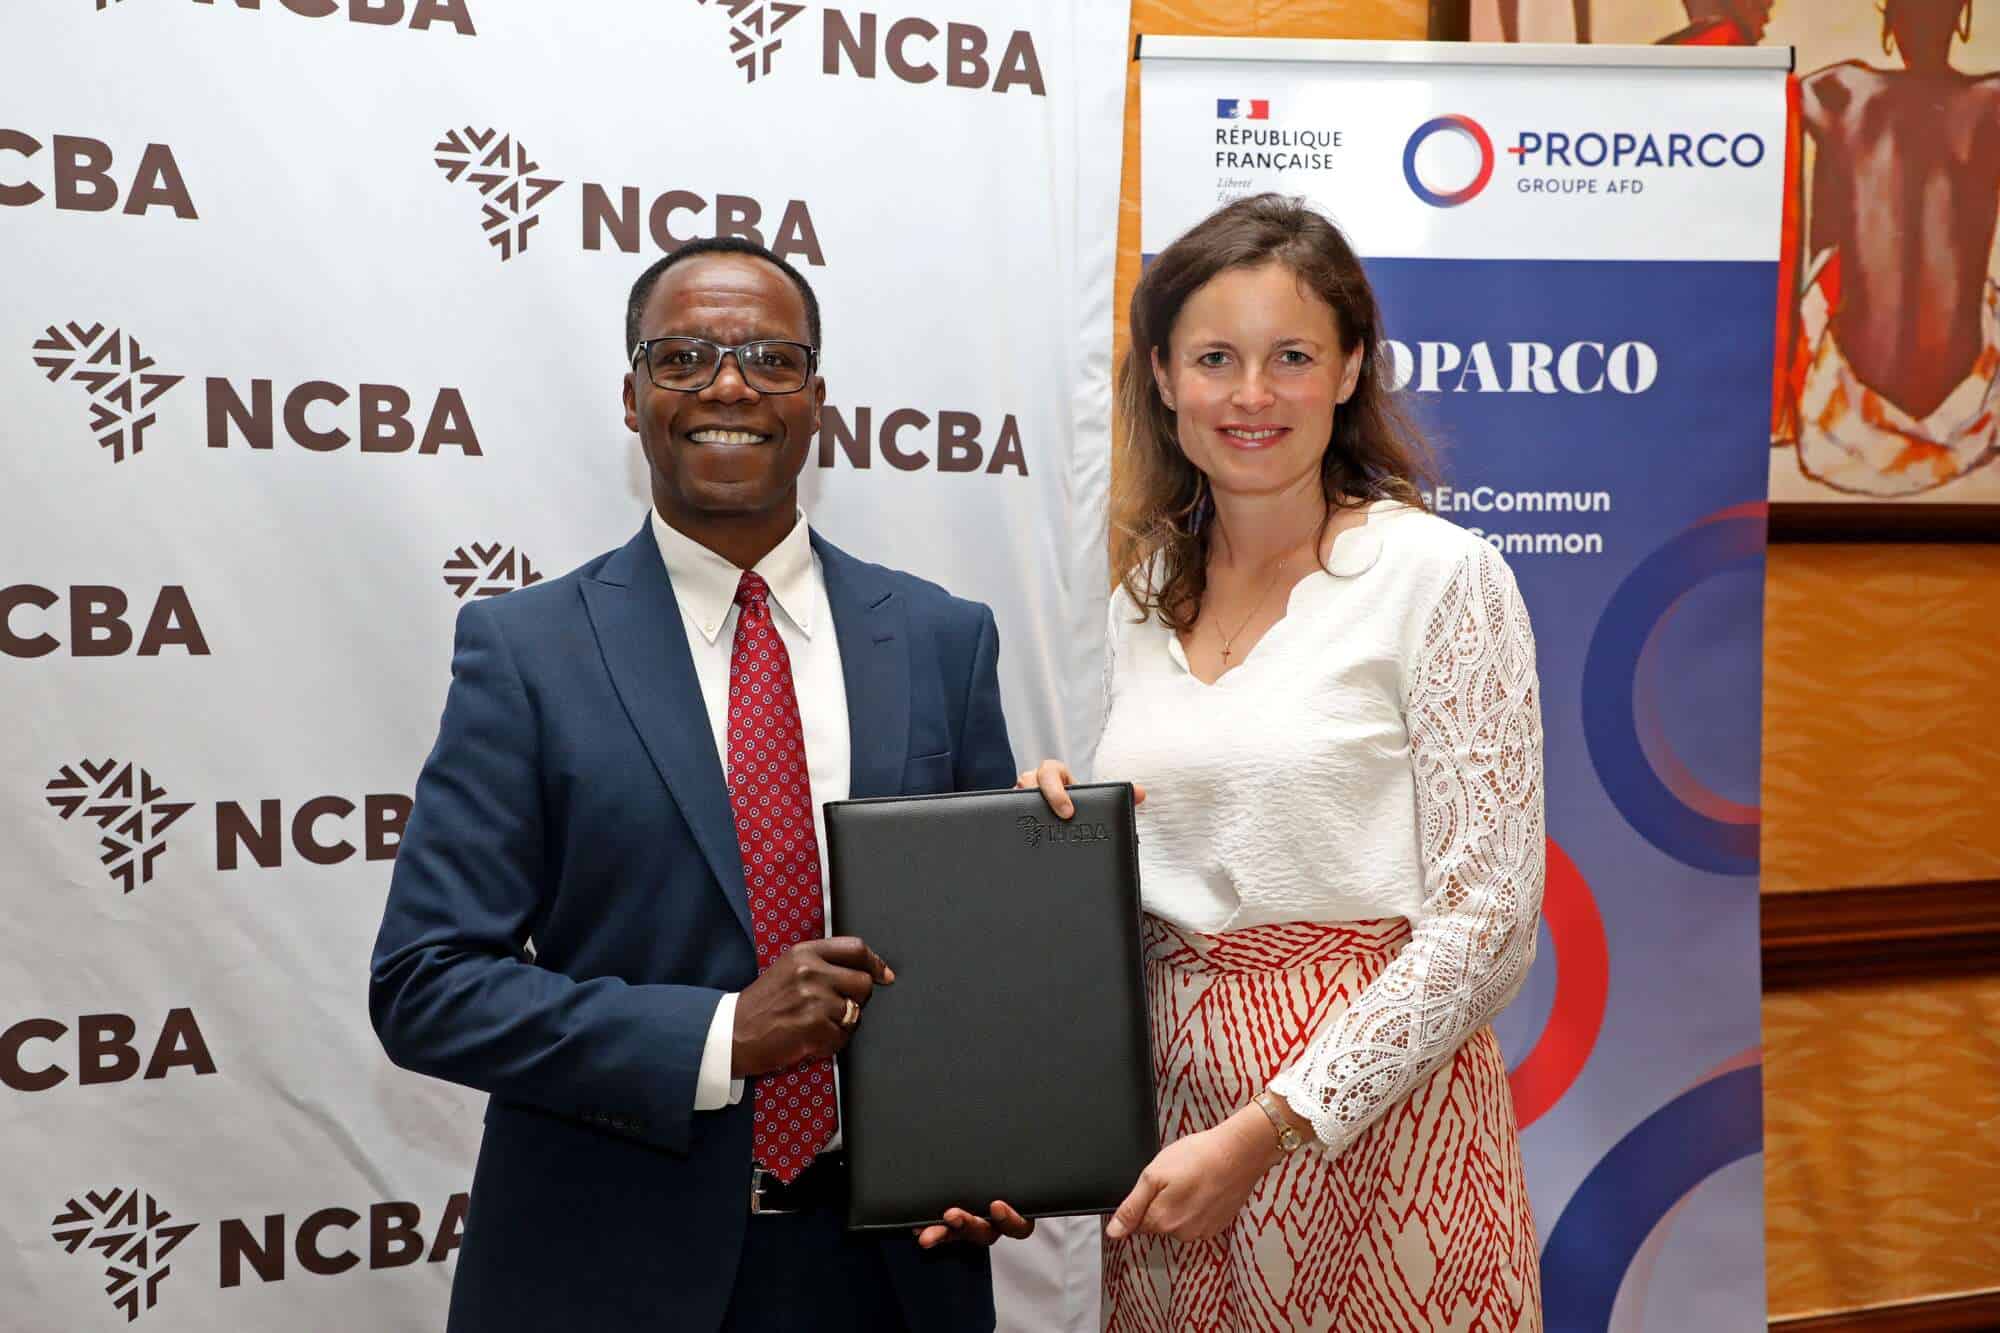 NCBA Secures Sh6.7 Billion Loan from Proparco for SMEs and Green Financing